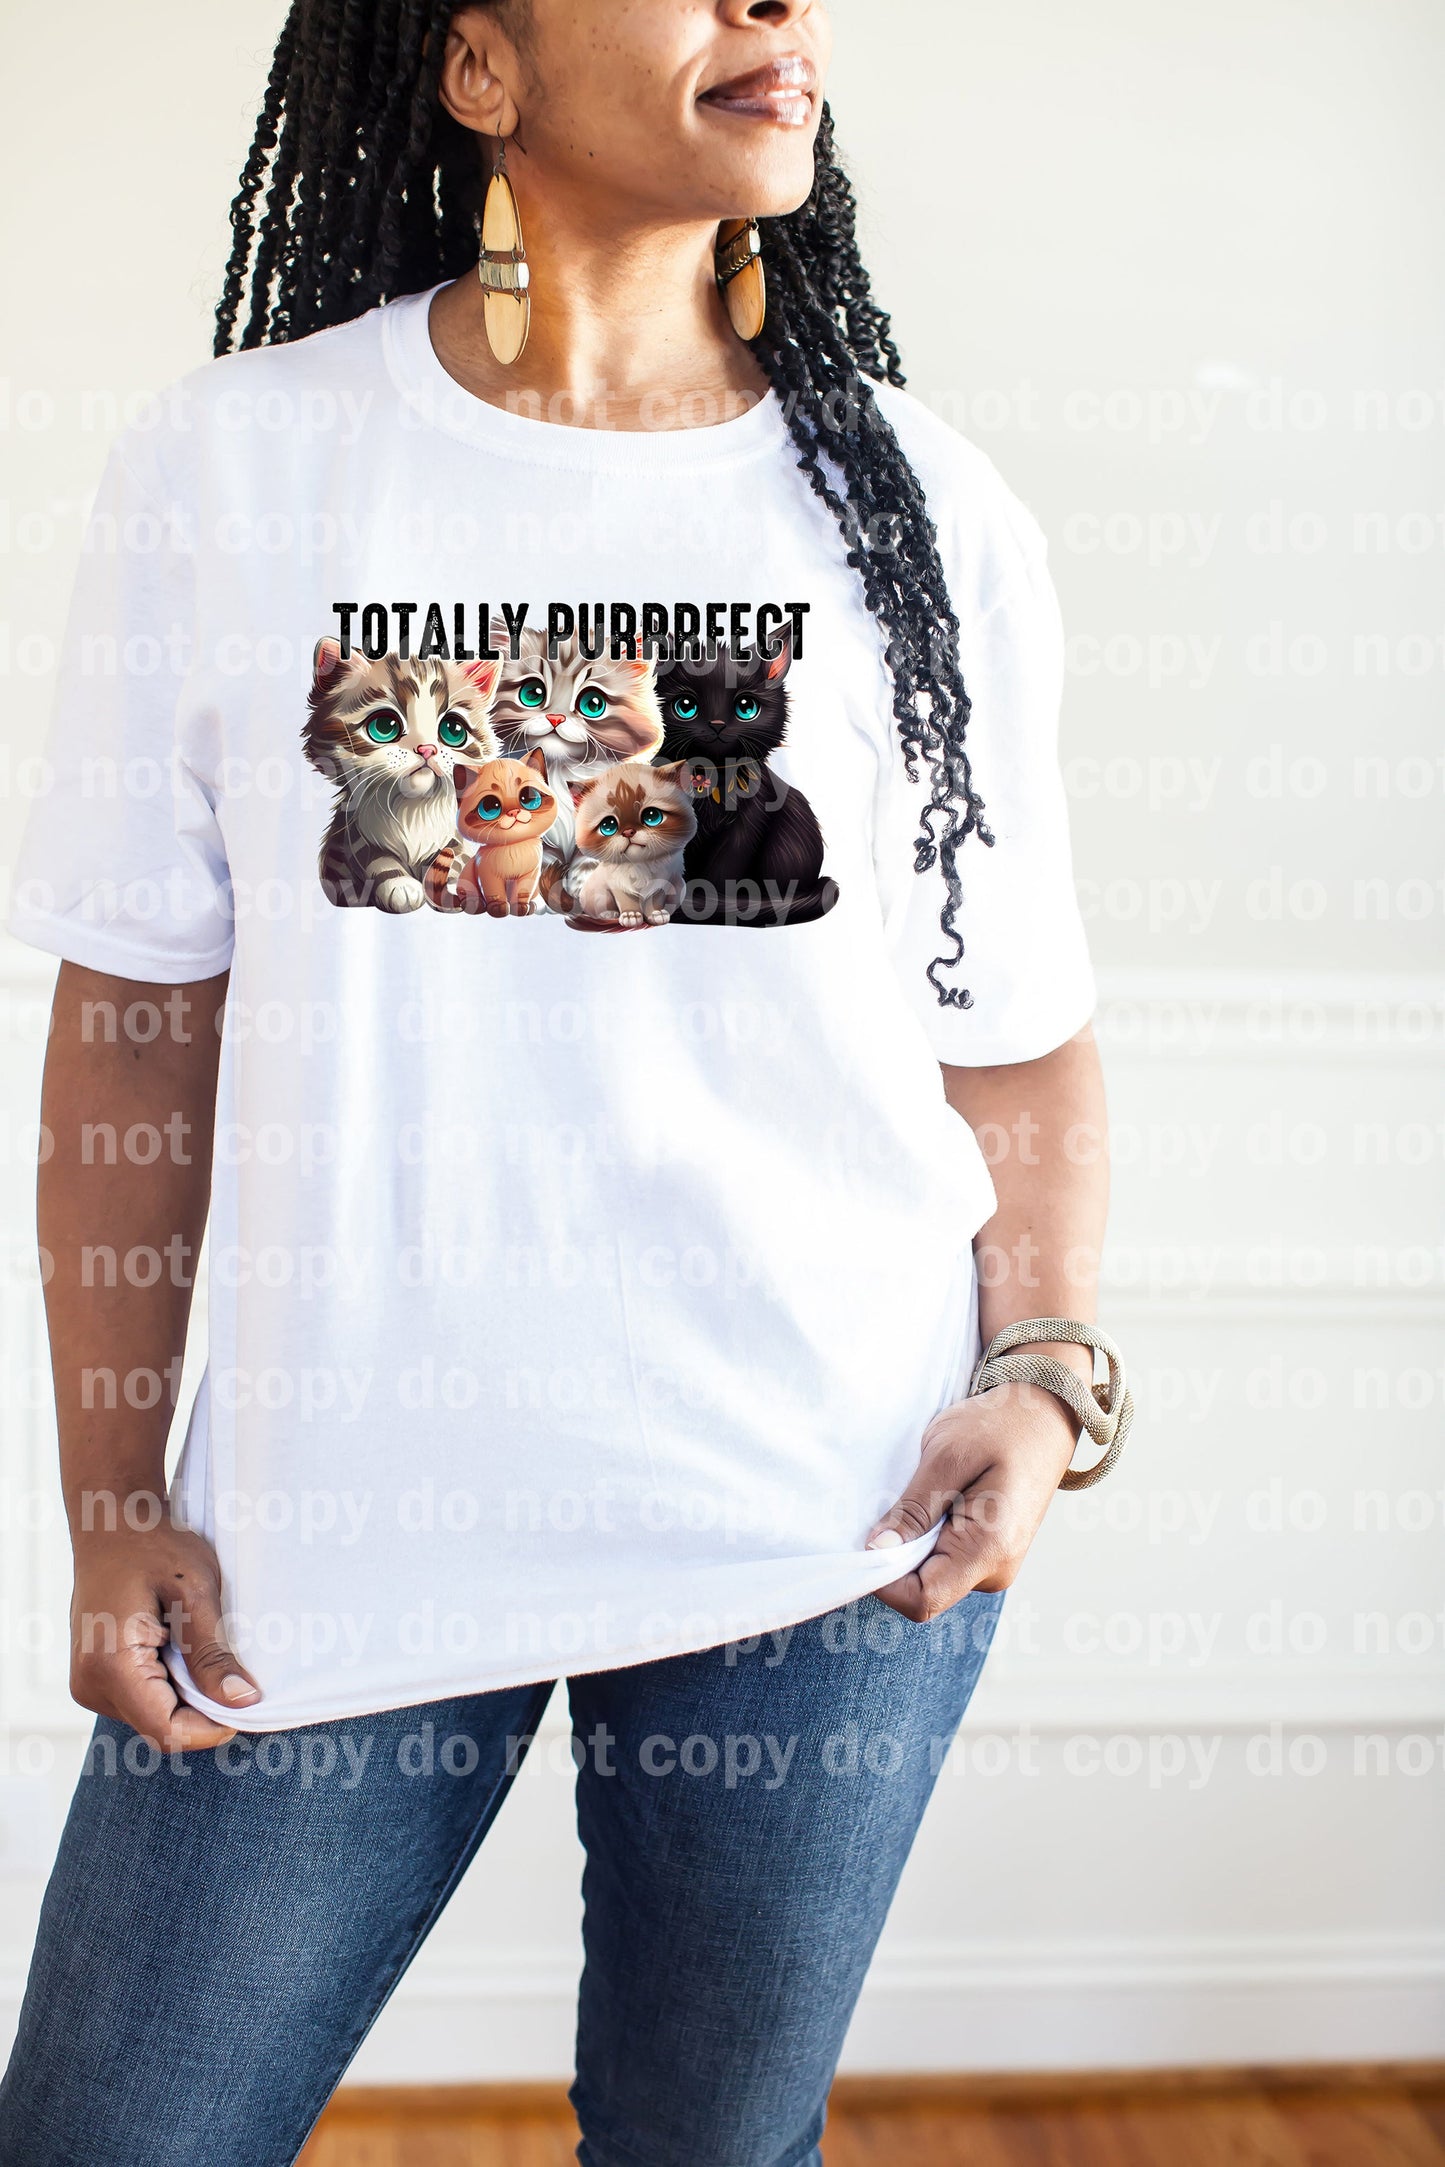 Totally Purrrfect Dream Print or Sublimation Print